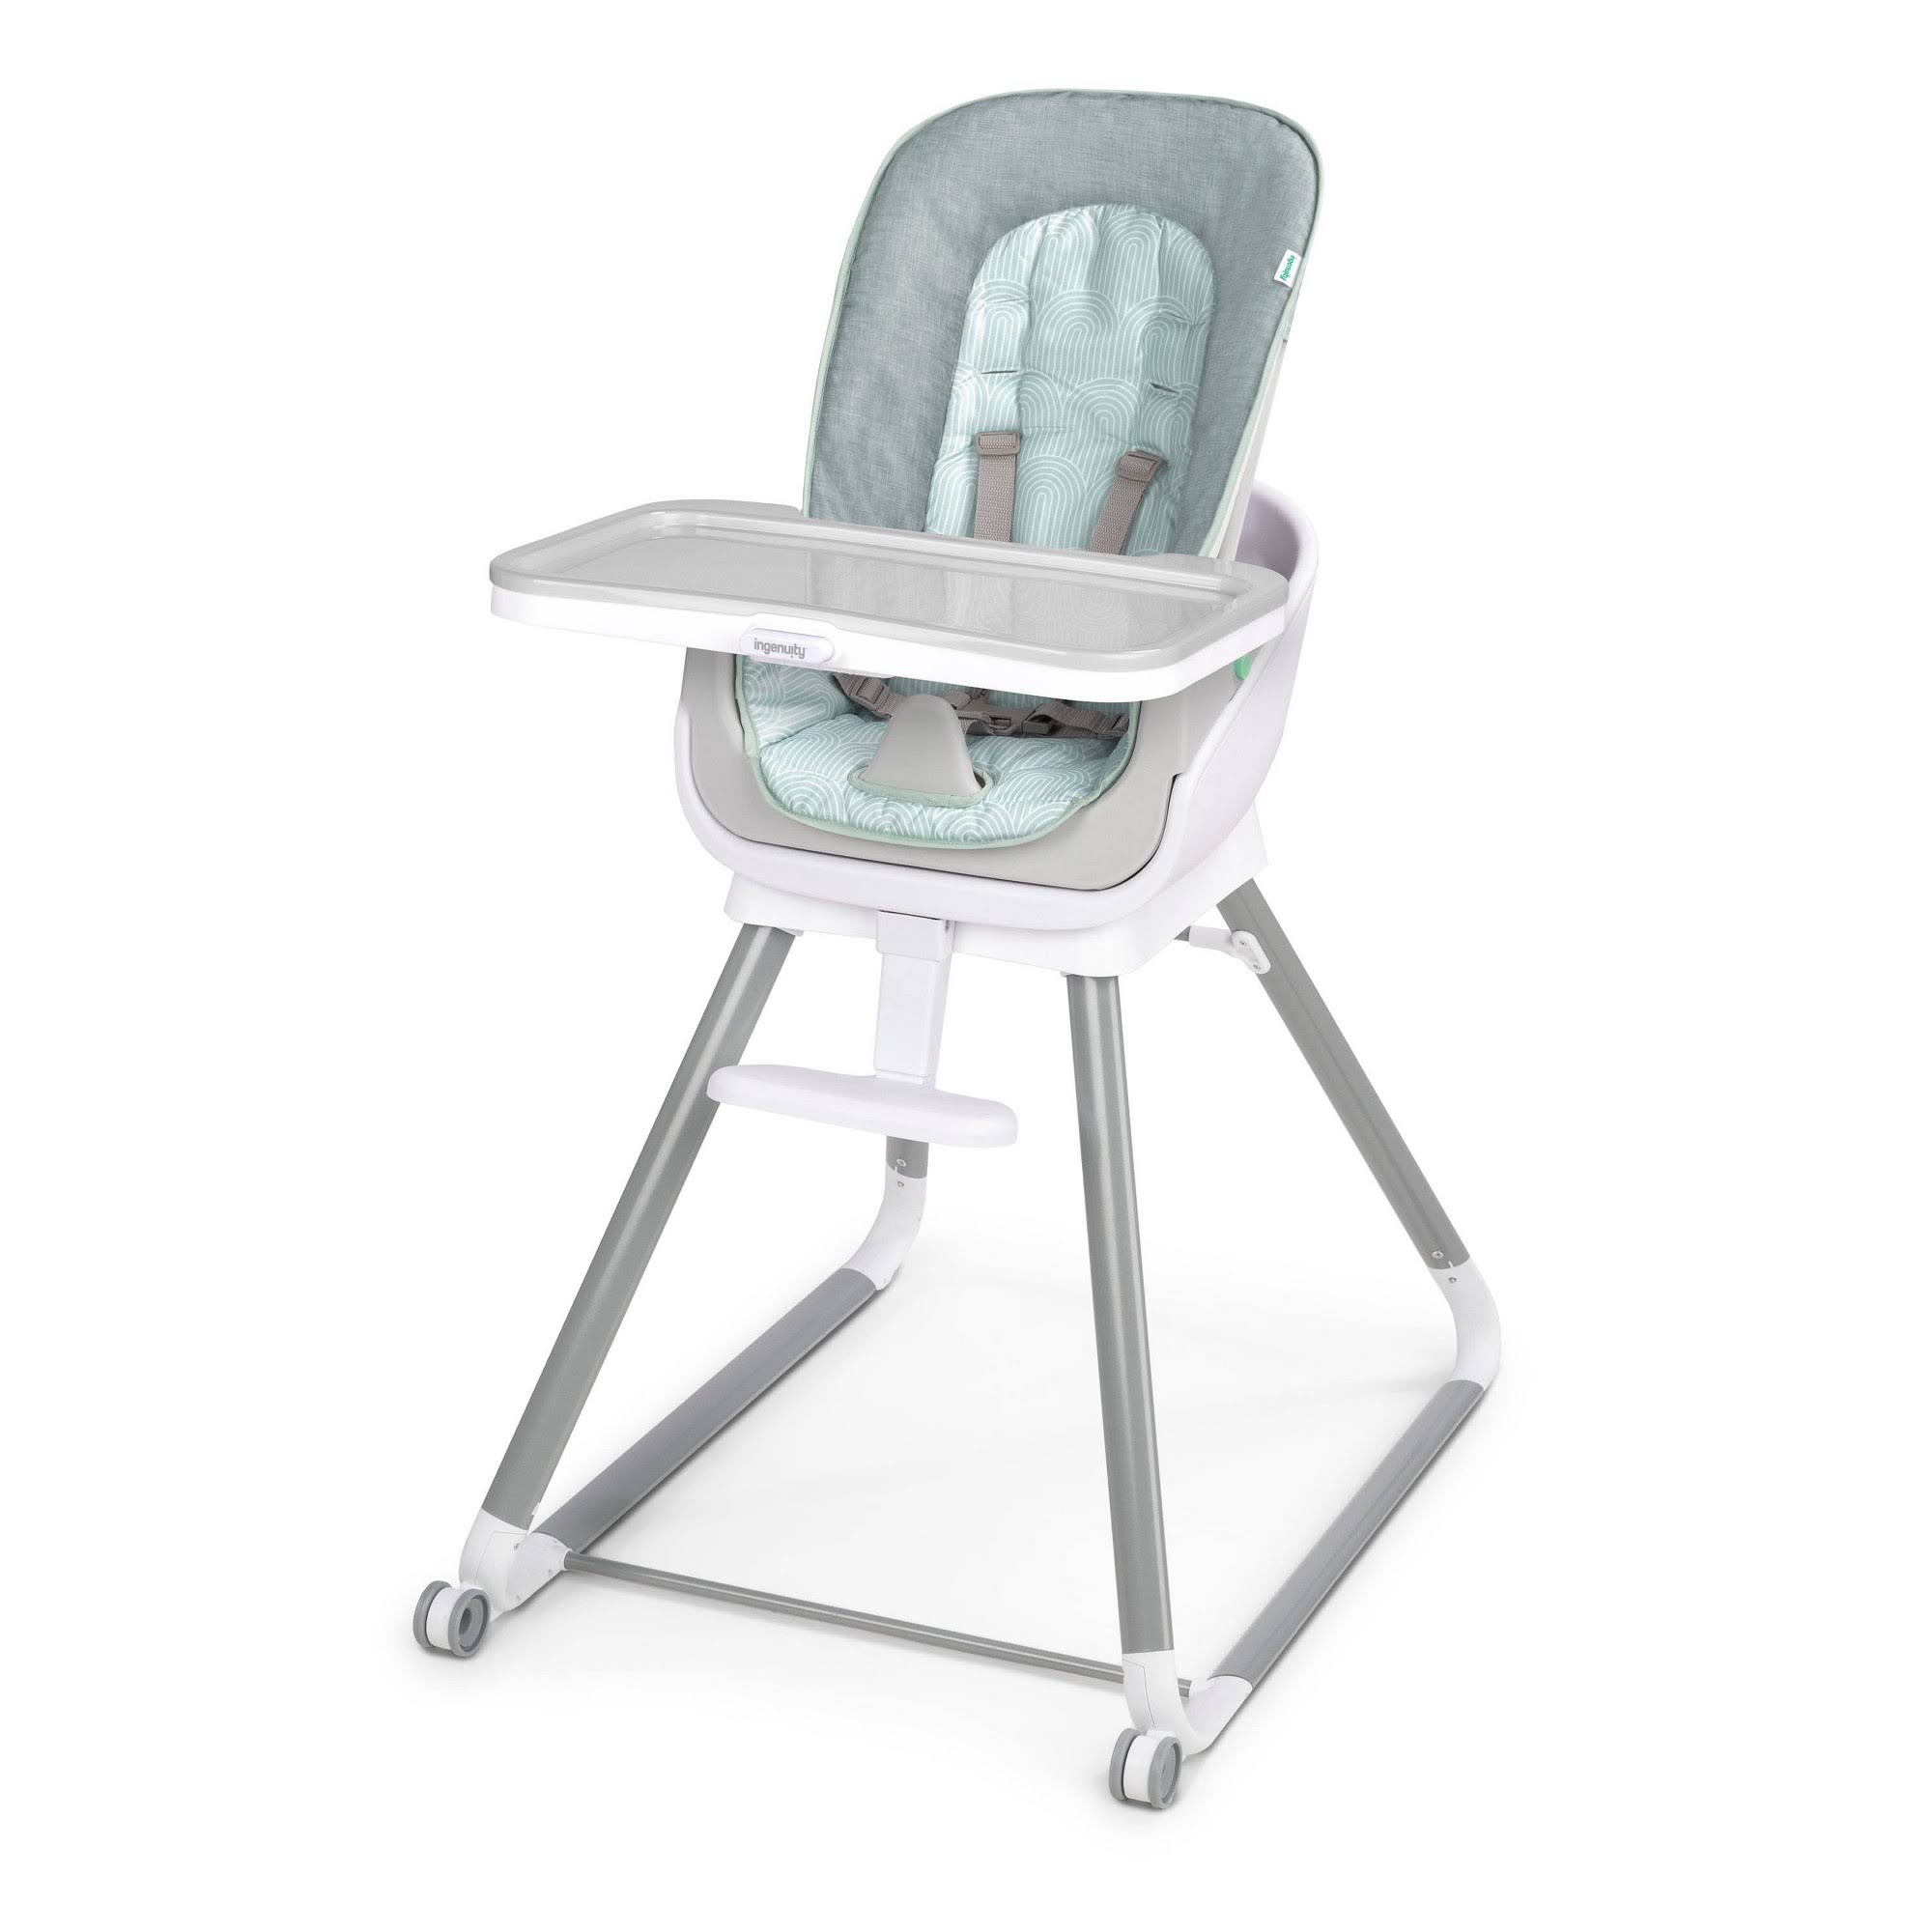 Ingenuity Beanstalk Baby to Big Kid 6-in-1 High Chair Converts from Soothing Infant Seat to Dining Booster Seat and More, Newborn to 5 yrs  C Ray